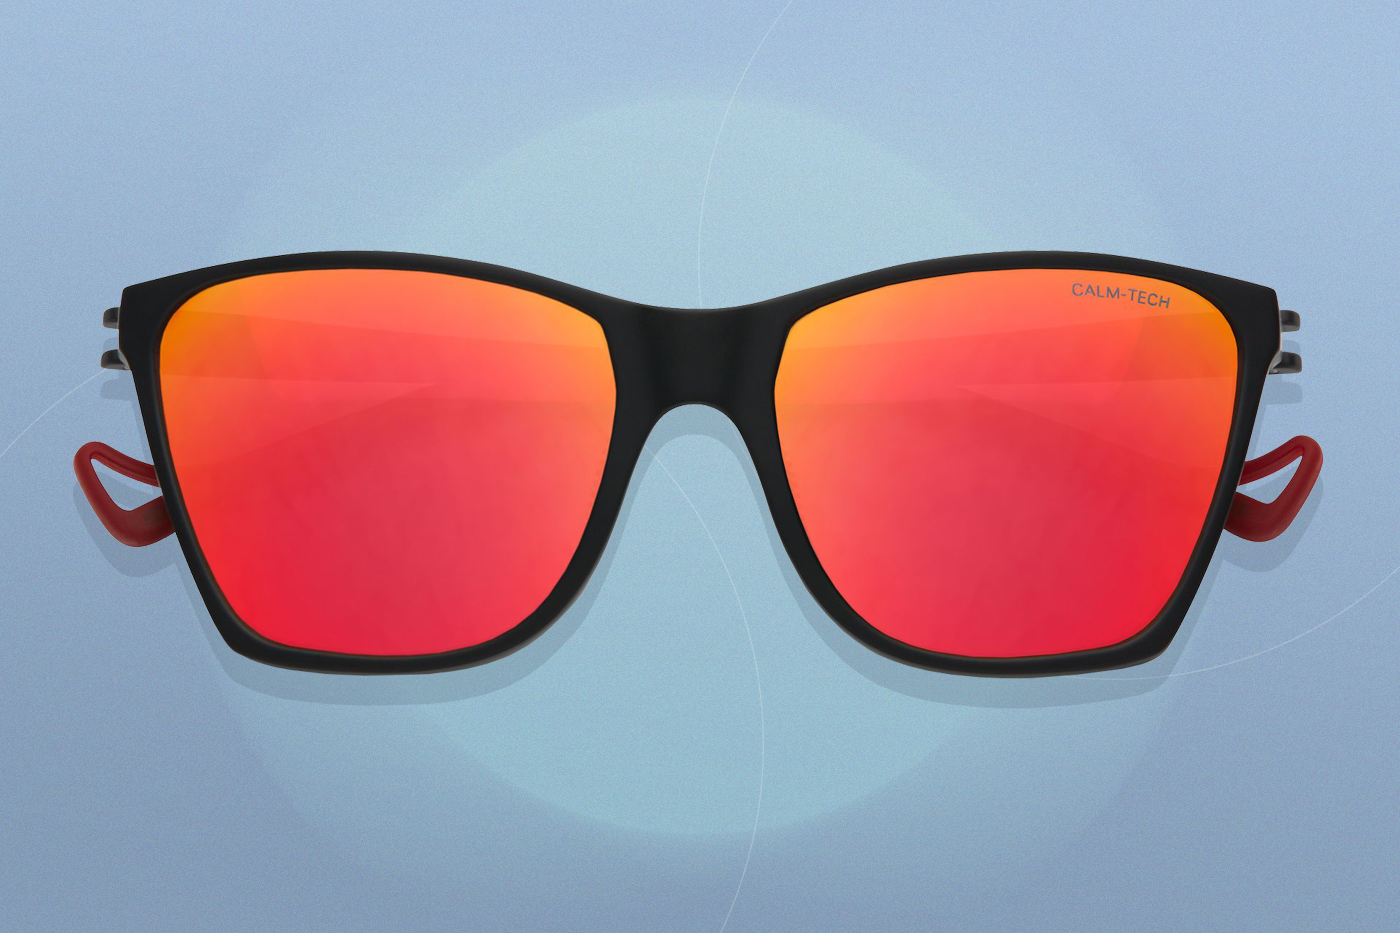 Best Sunglasses for Running by District Vision